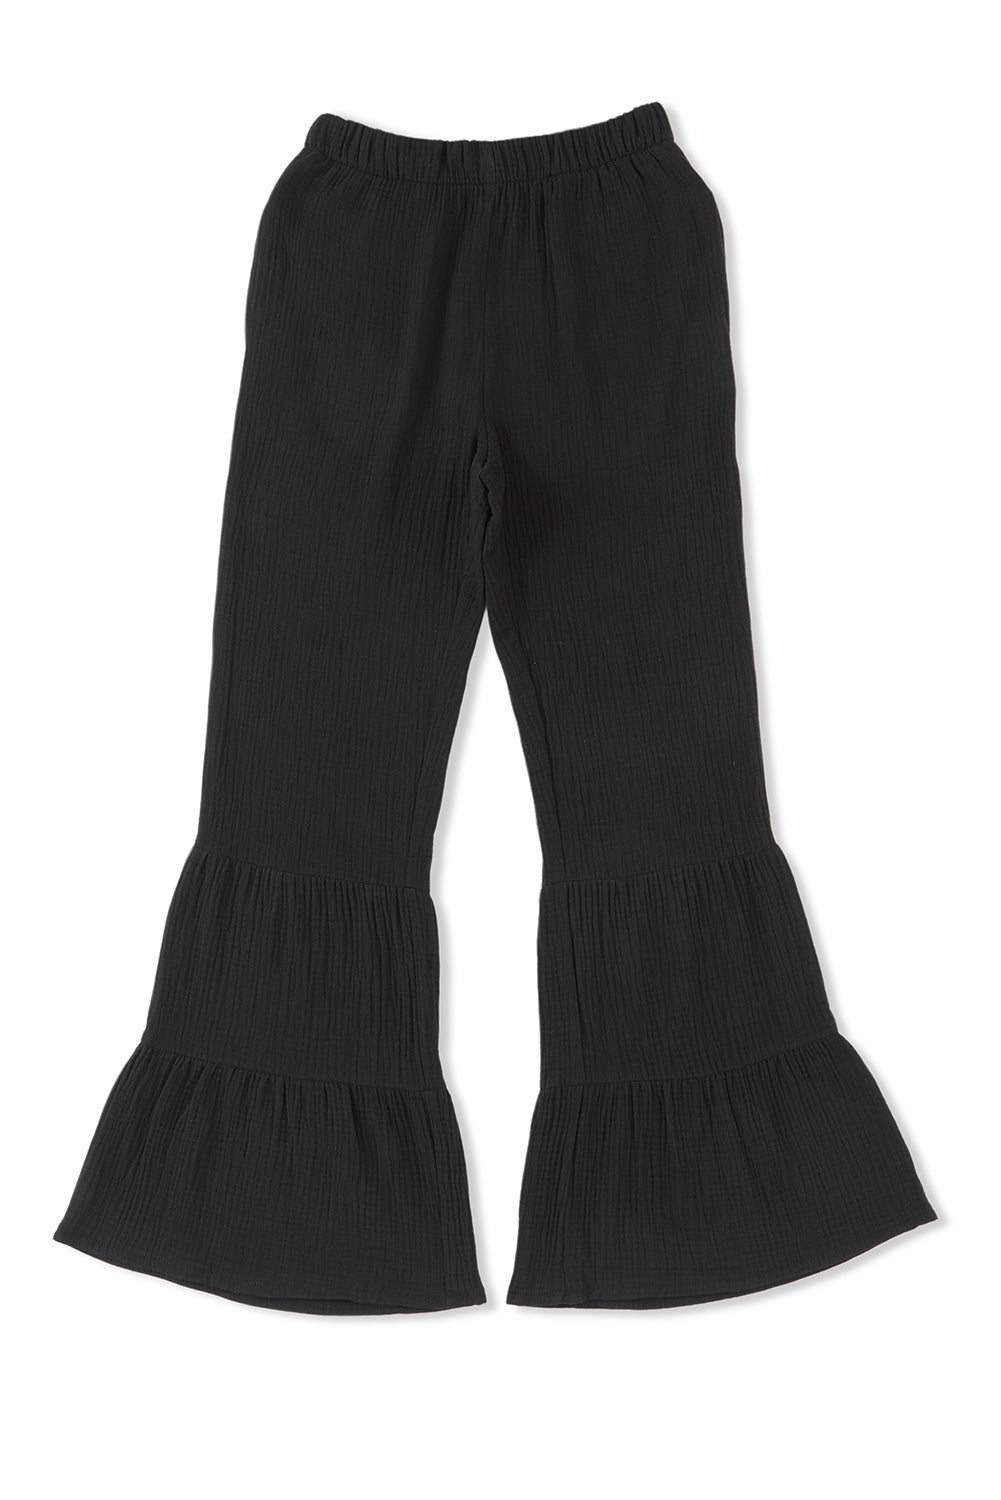 Black Textured High Waist Ruffled Bell Bottom Pants – Farmhouse Signs and  Co.